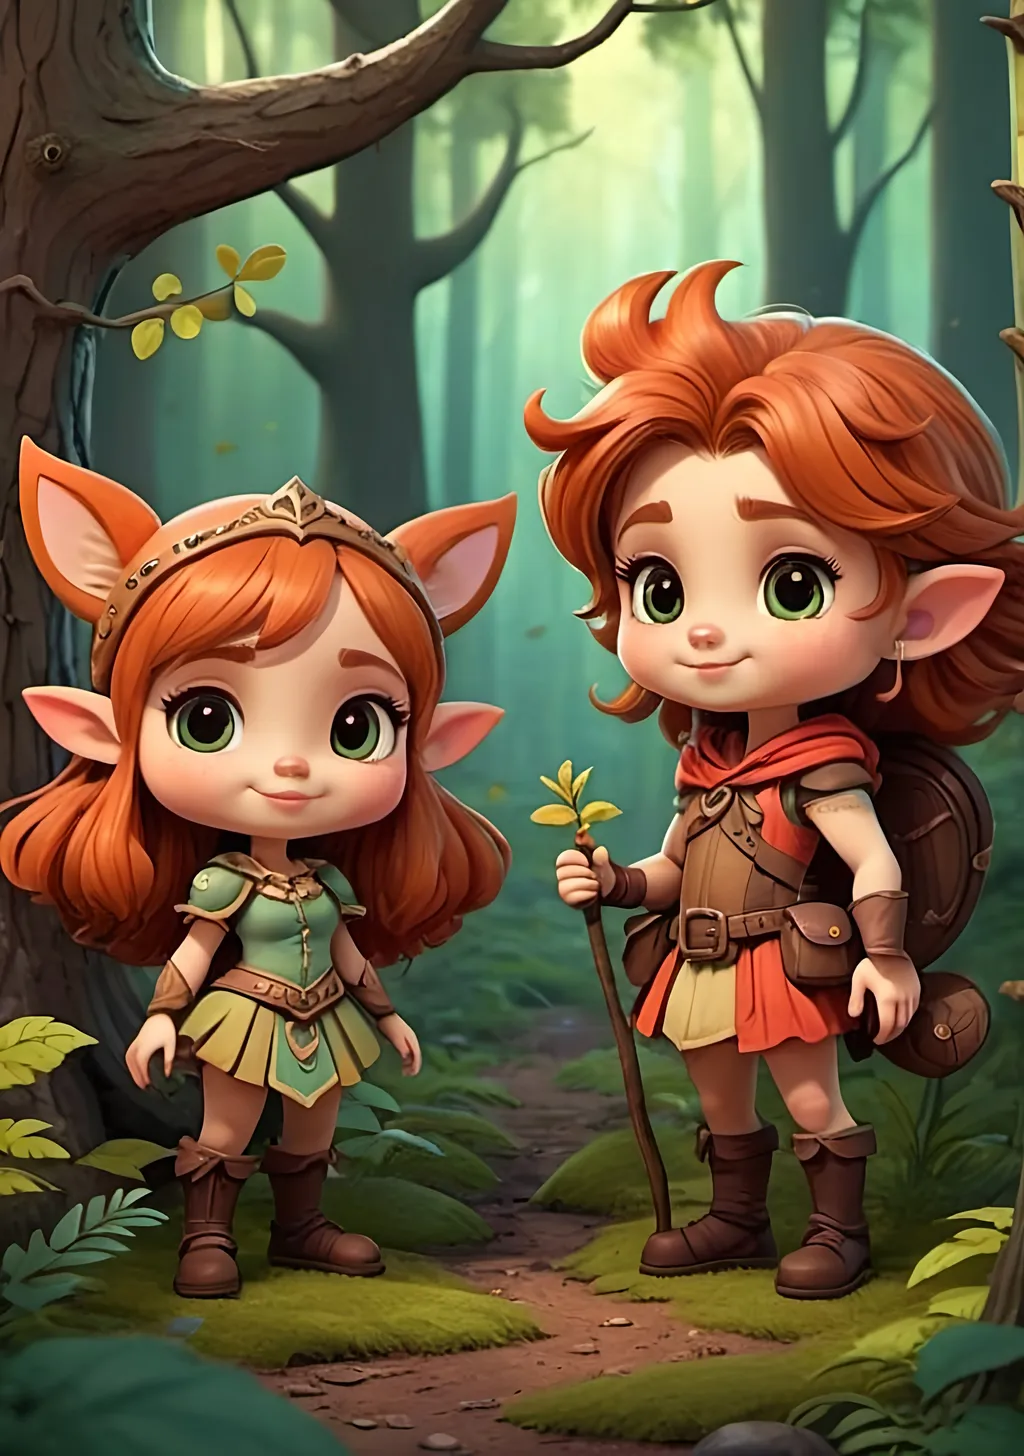 Prompt: cute cartoon fantasy characters in forest setting